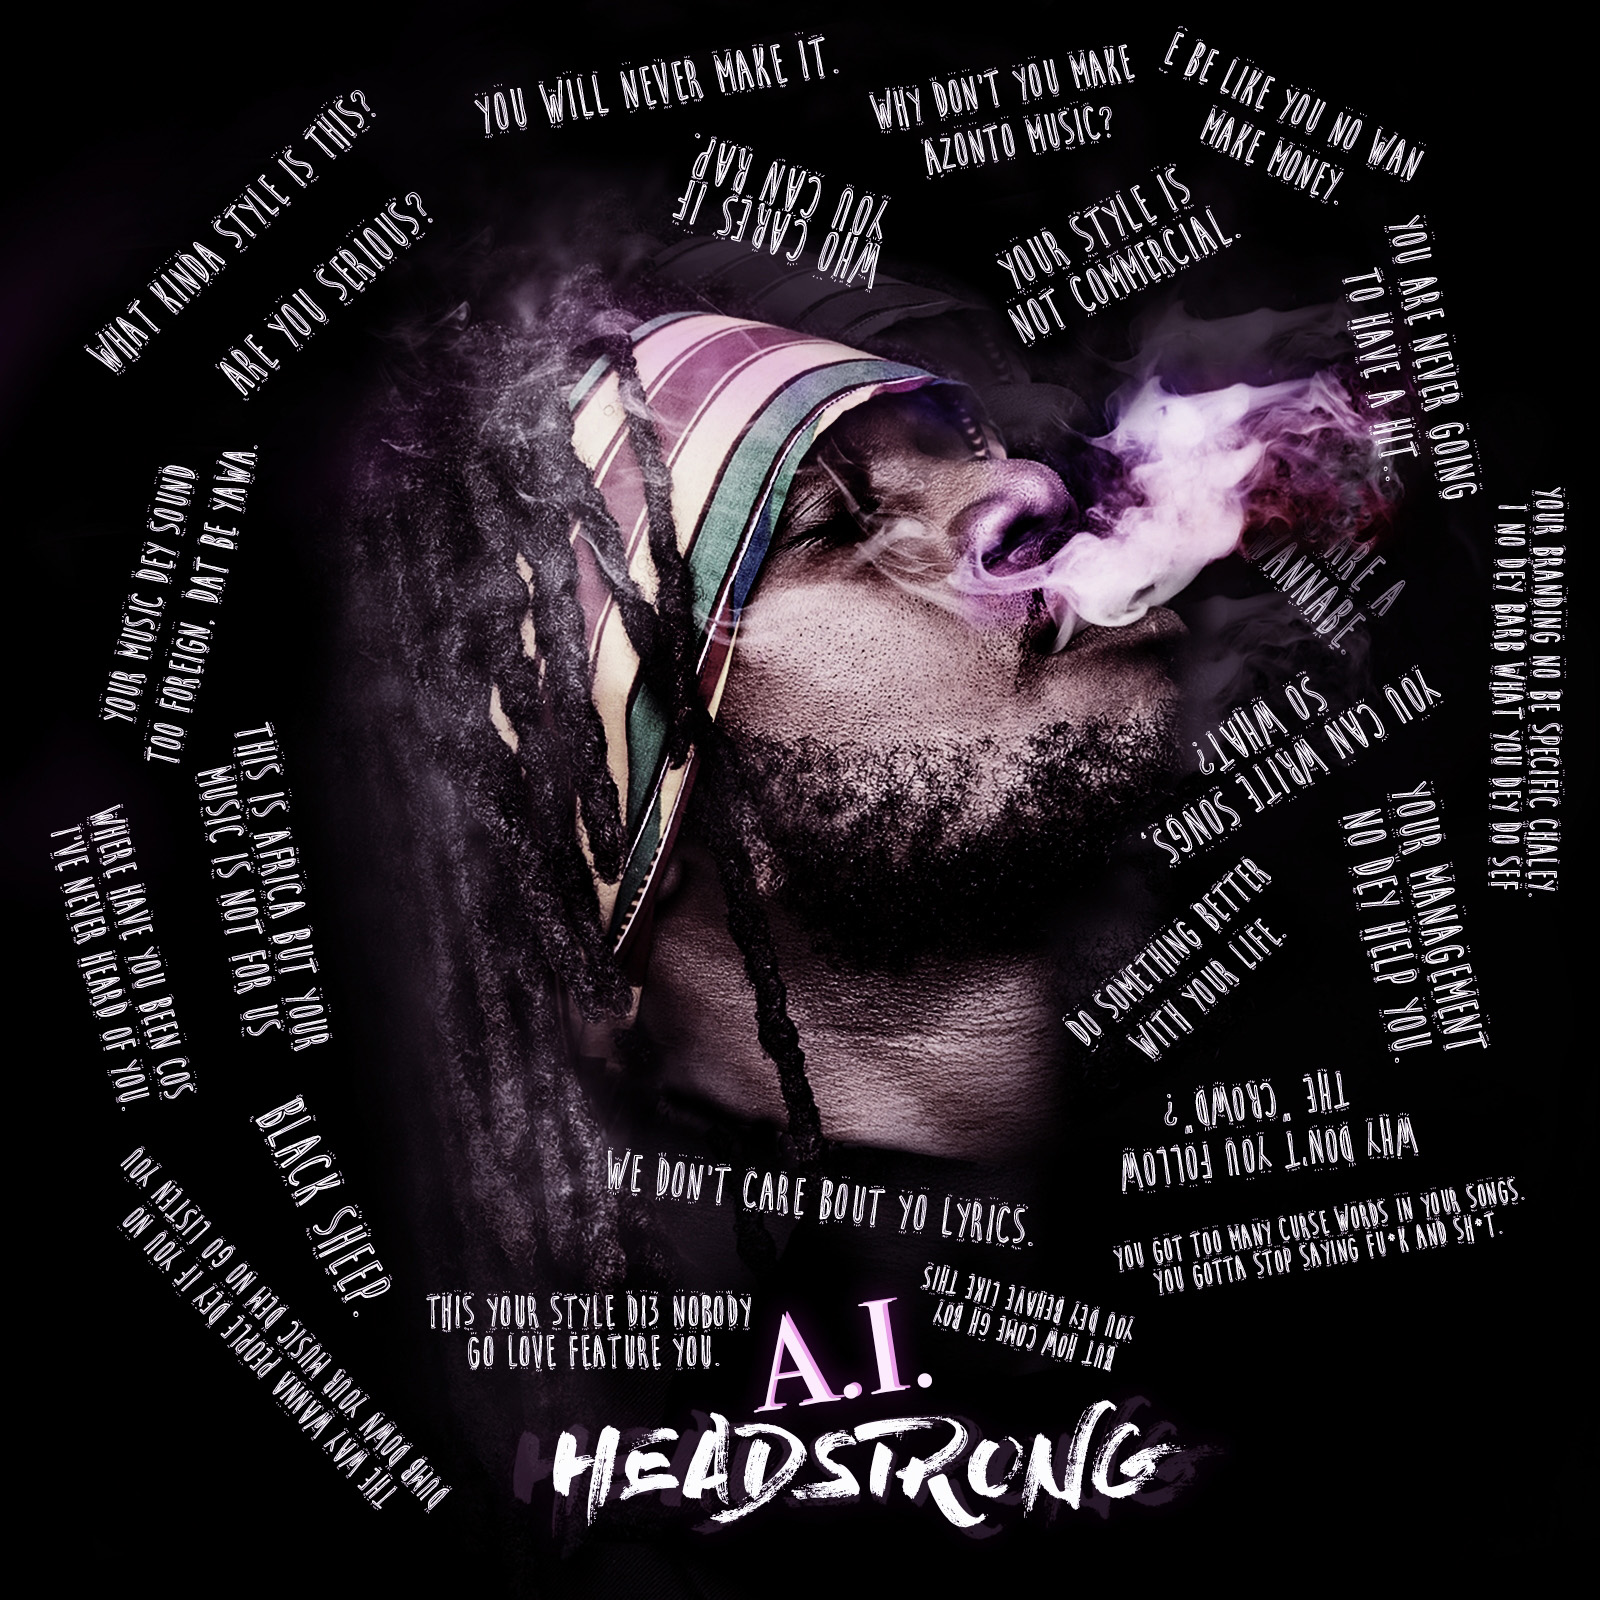 Headstrong EP by A.I.